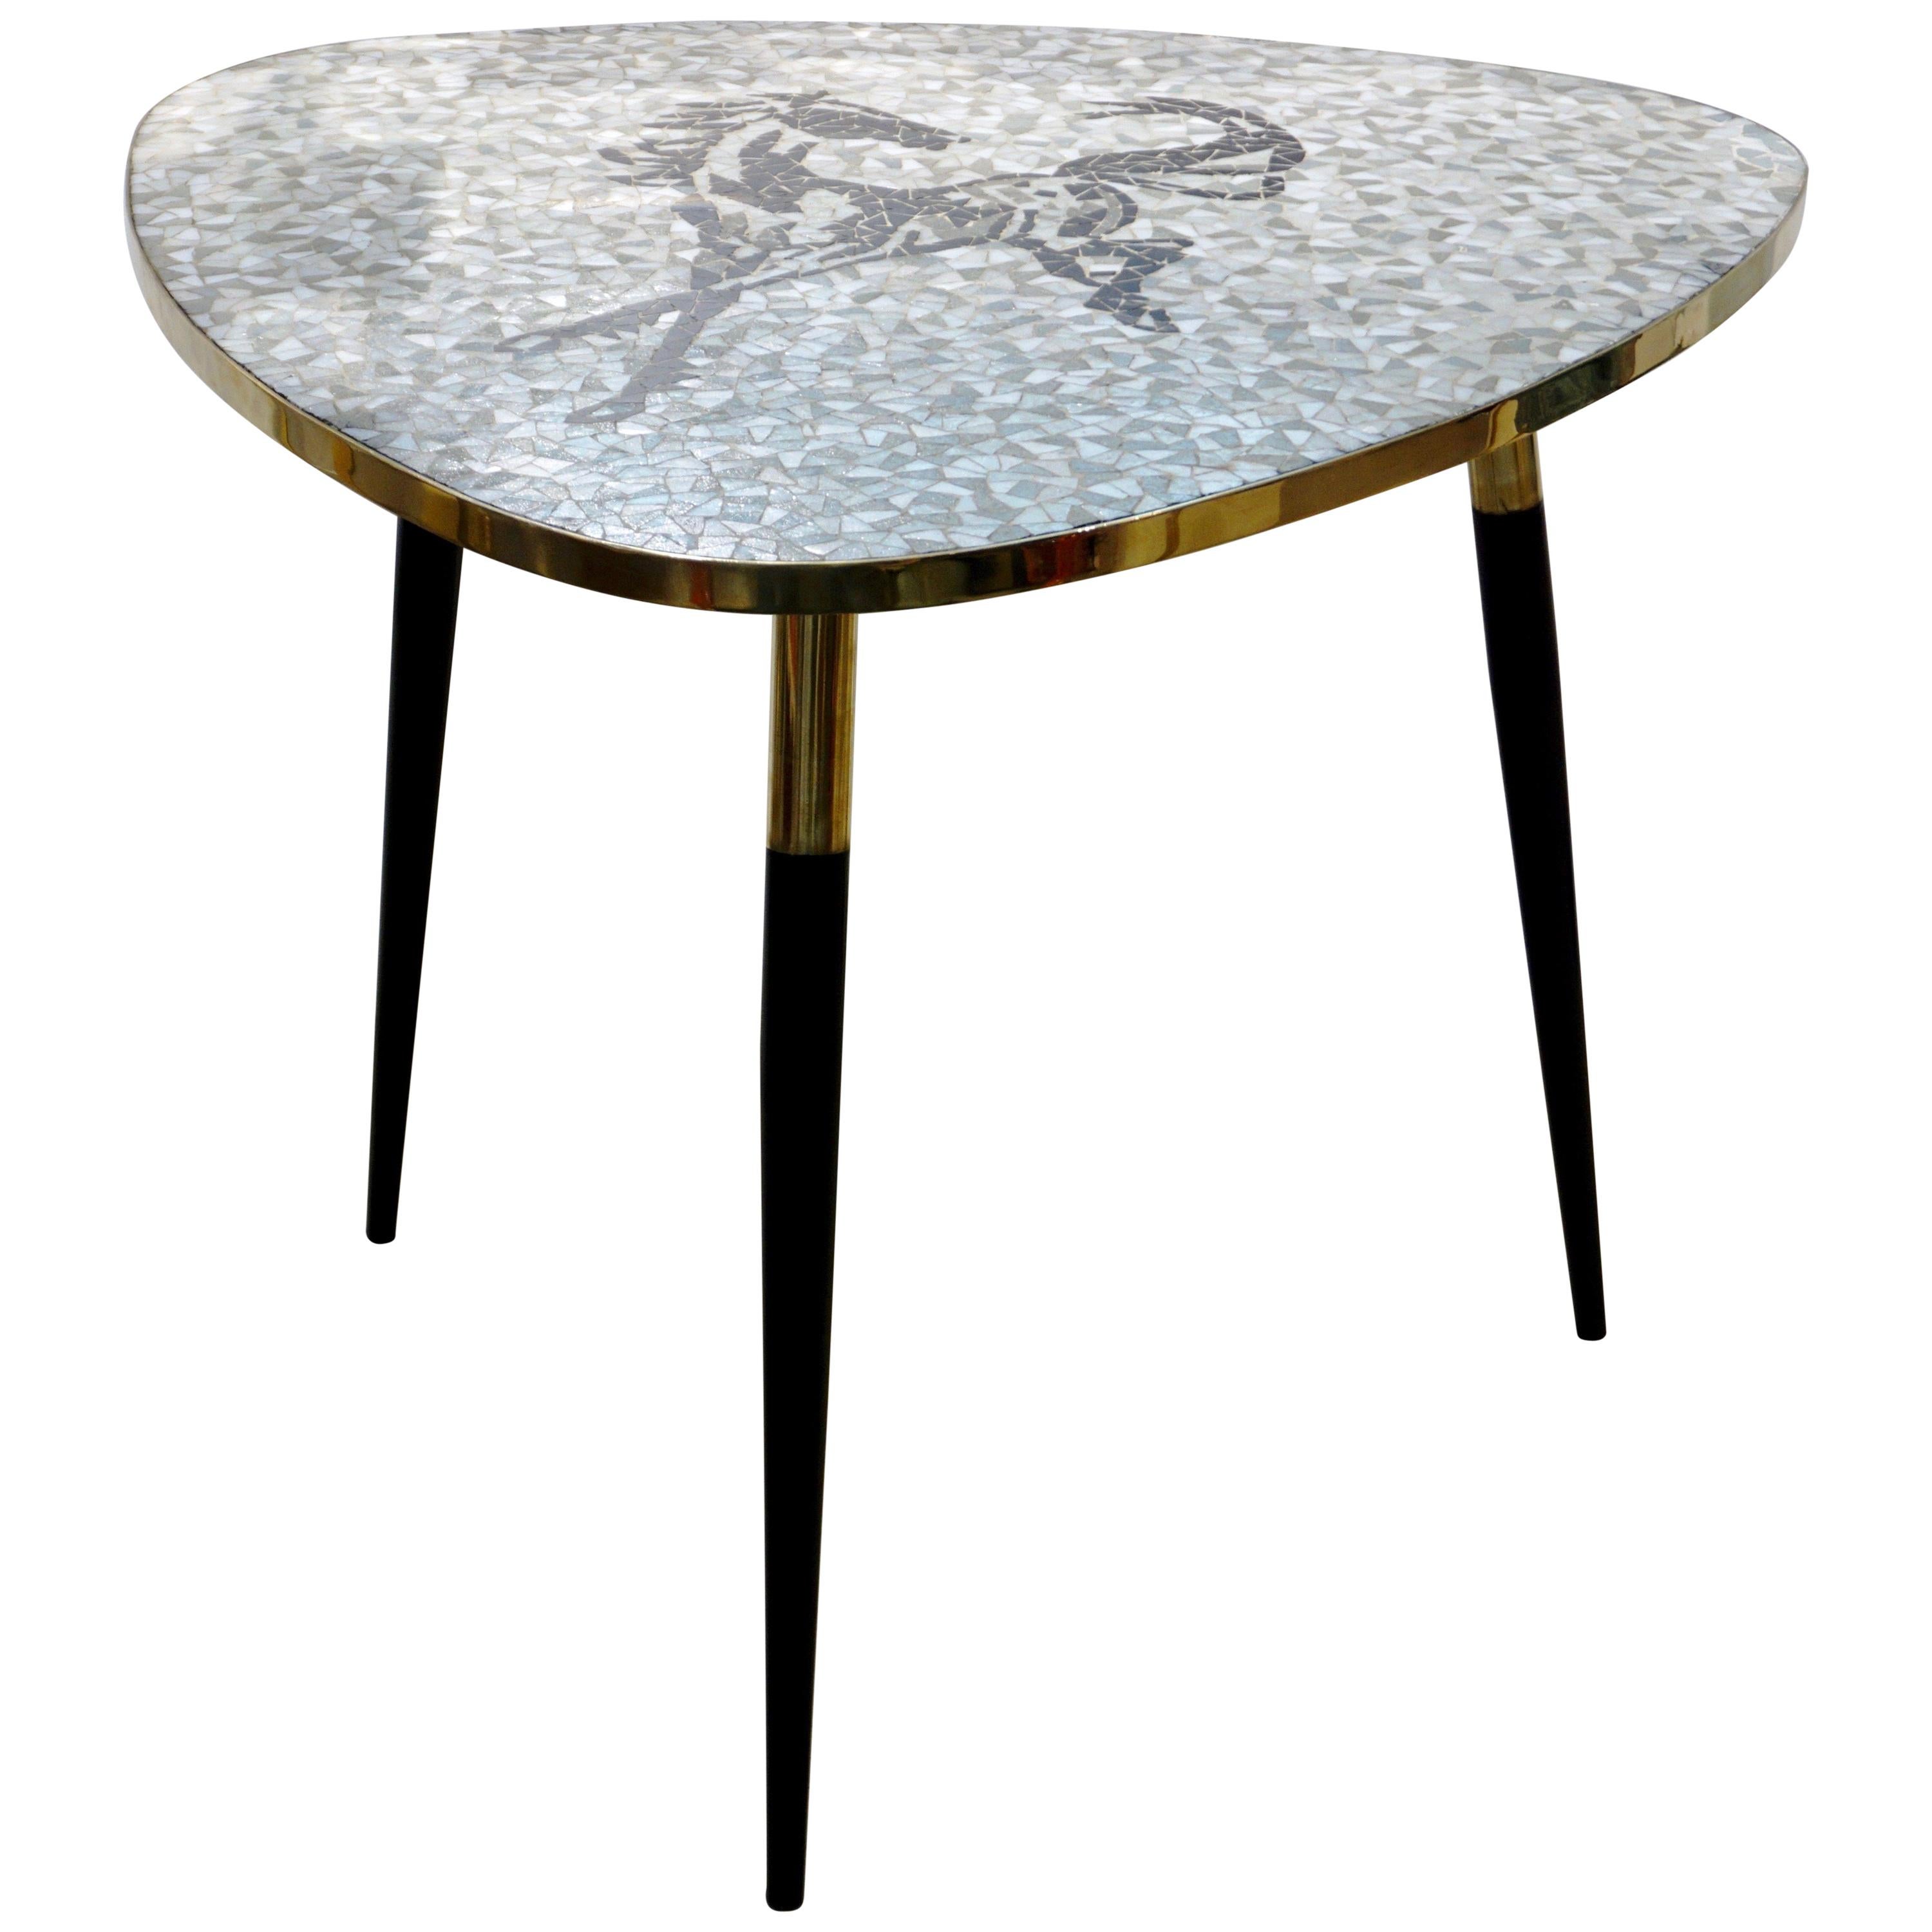 1953 Italian Vintage Black White Gray Horse Mosaic Brass Dining / Coffee Table For Sale